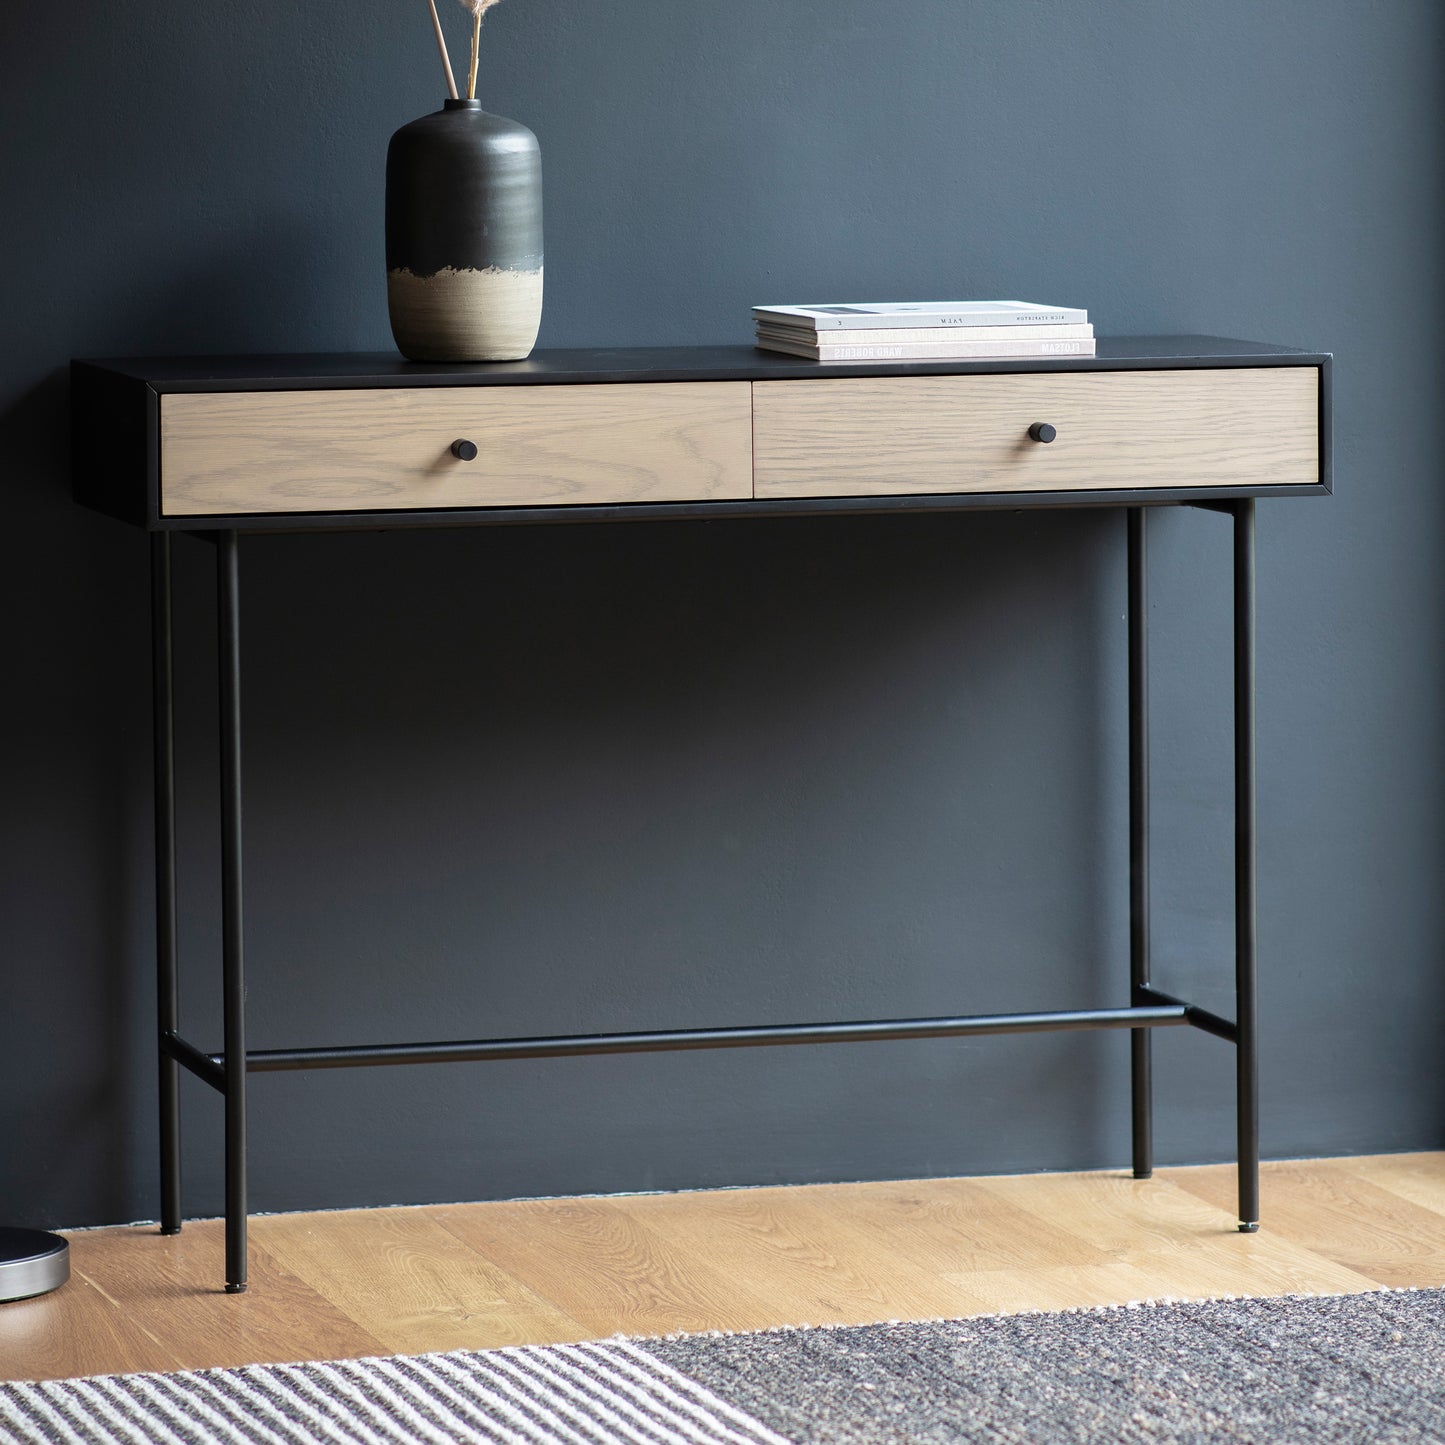 A Prawle 2 Drawer Console Table 1100x350x800mm from Kikiathome.co.uk, an interior decor piece with two drawers and a vase for home furniture.